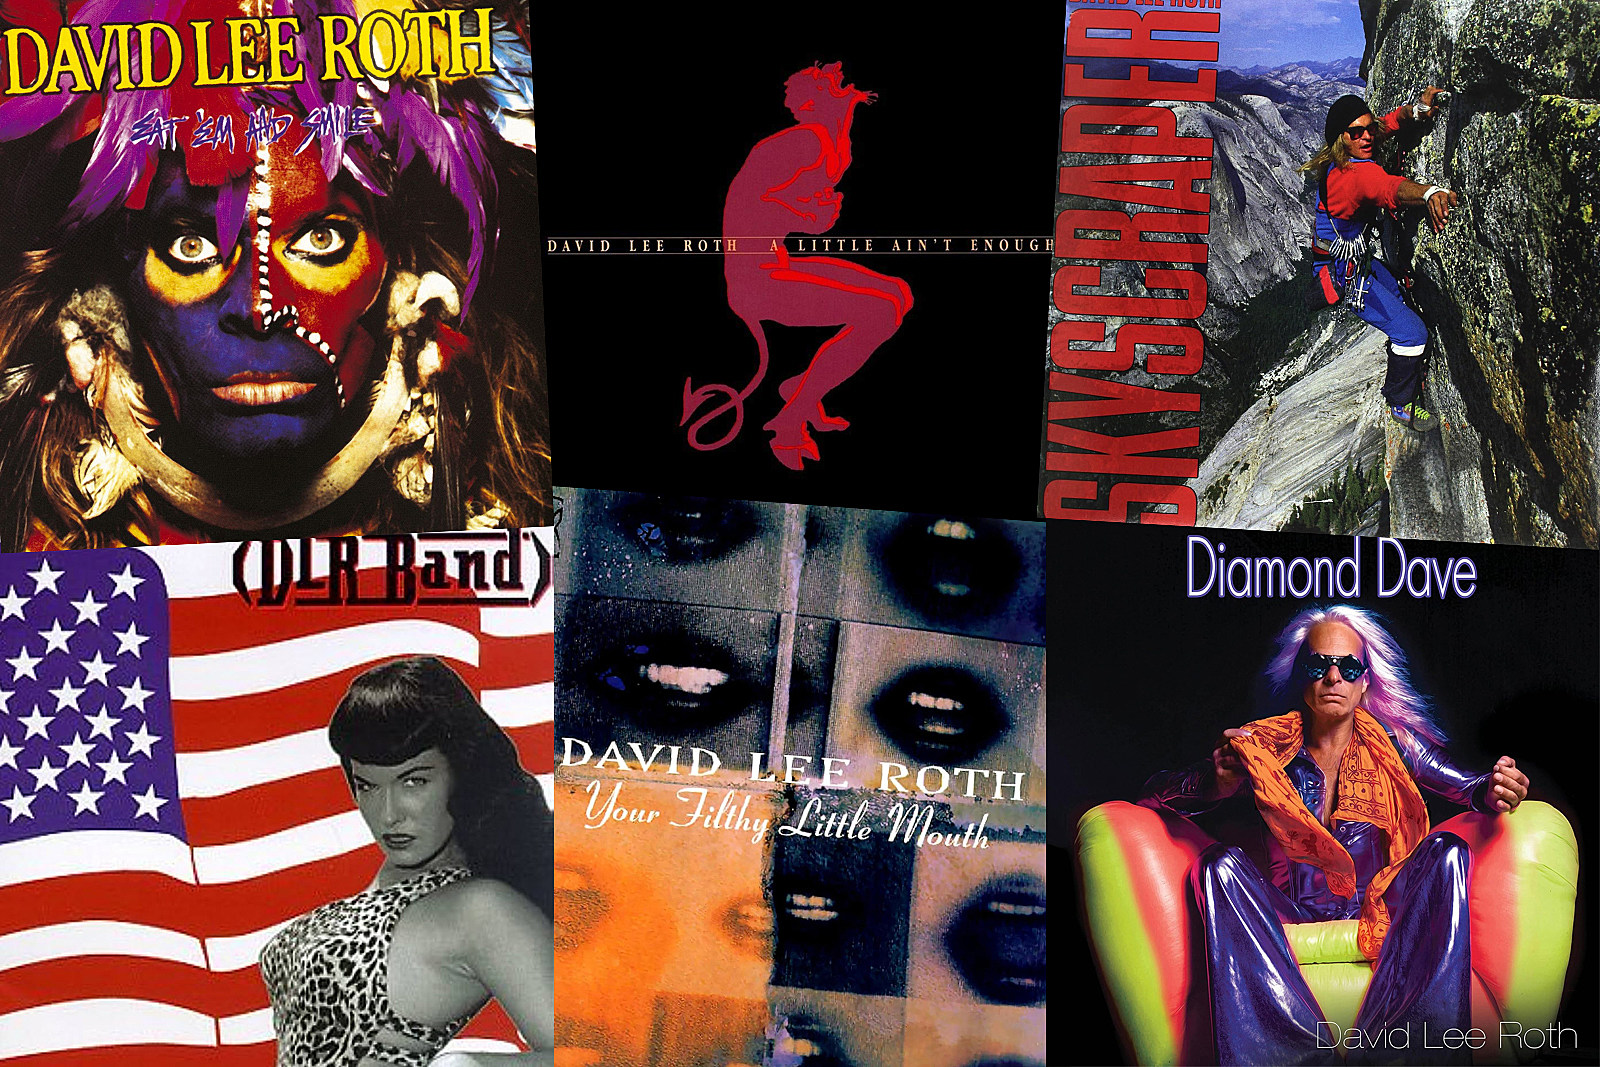 David Lee Roth Solo Albums Ranked Worst to Best